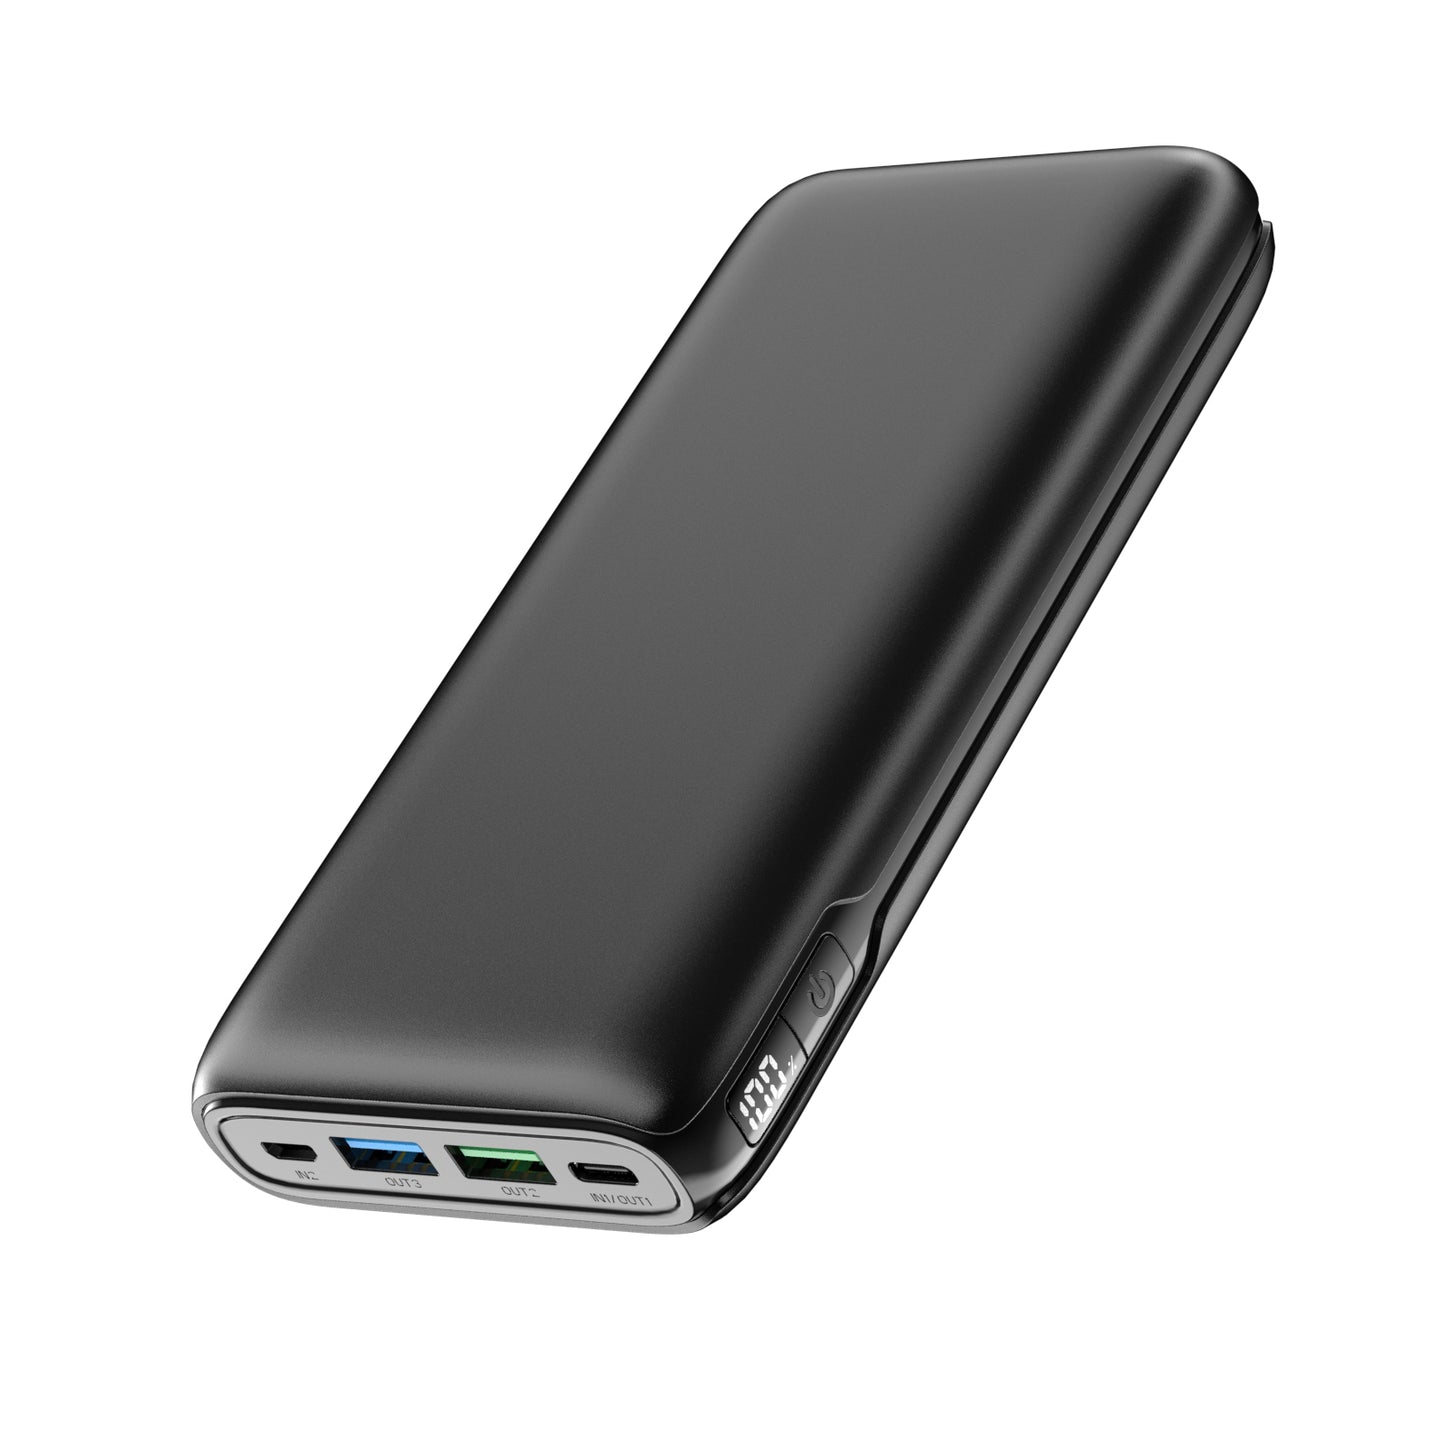 Power Bank 20000mAh External Battery with 4 Outputs - Black